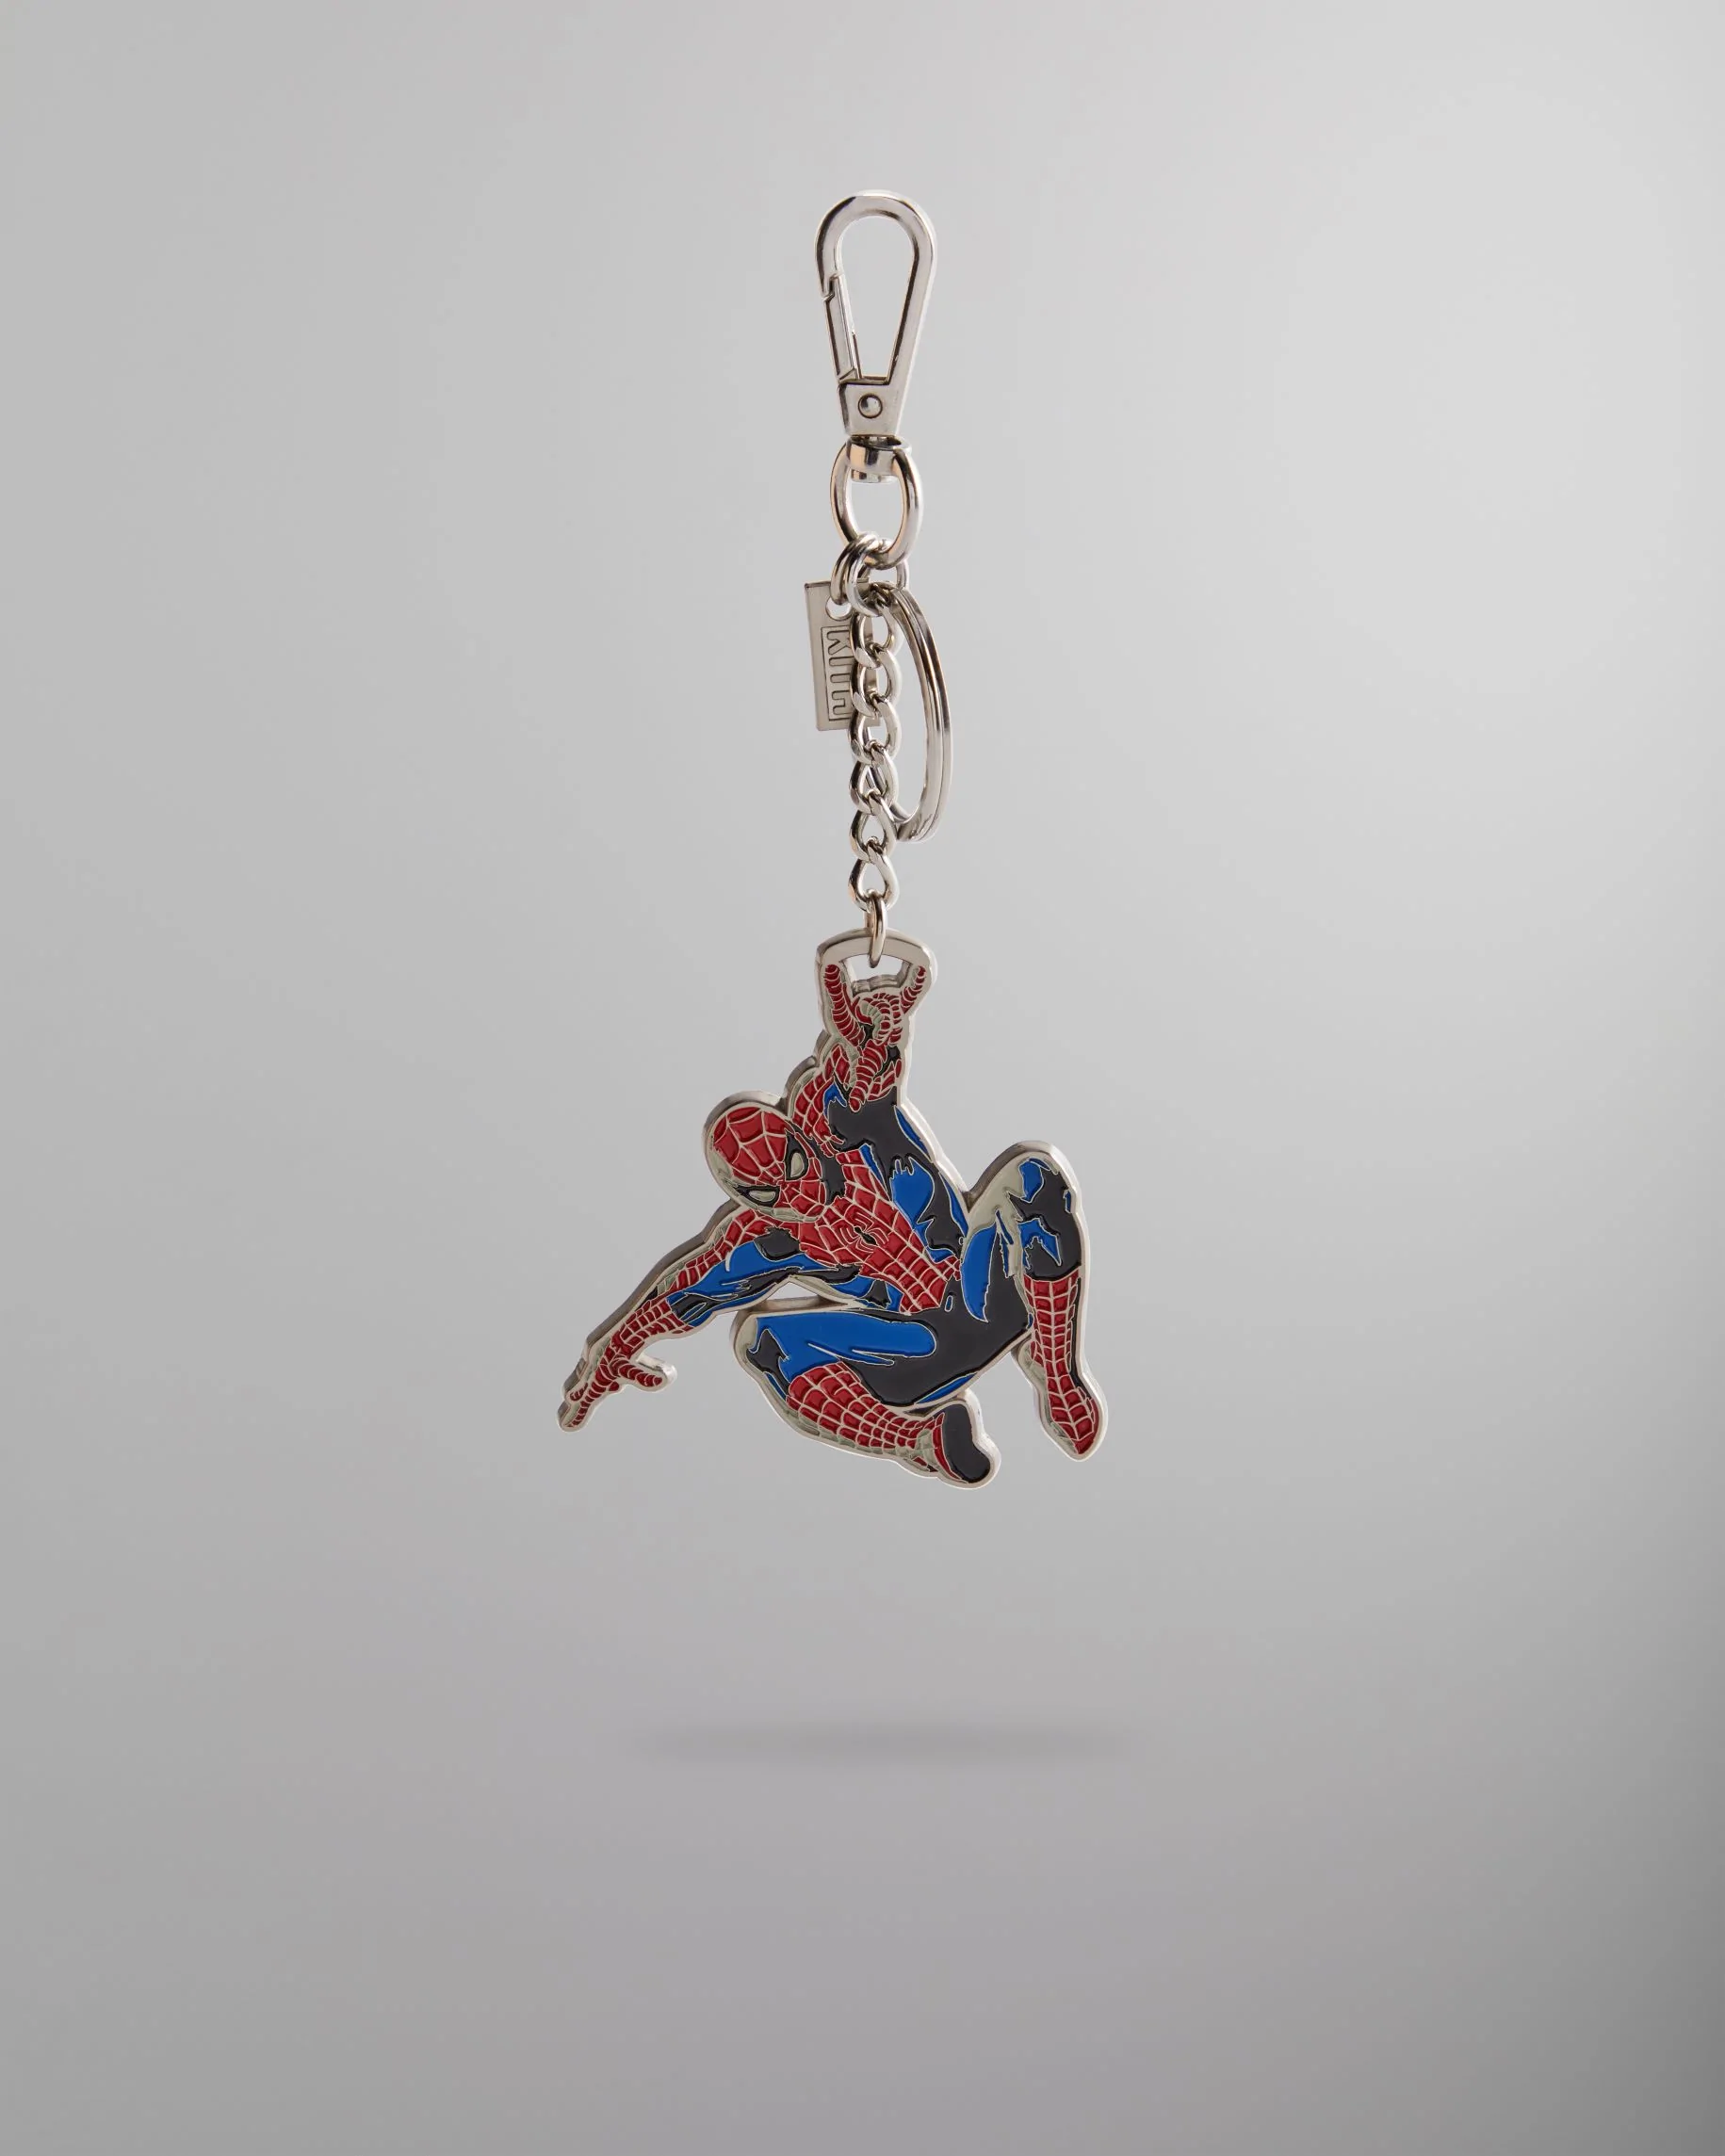 kith-marvel-spider-man-60th-anniversary-collection-release-20220715